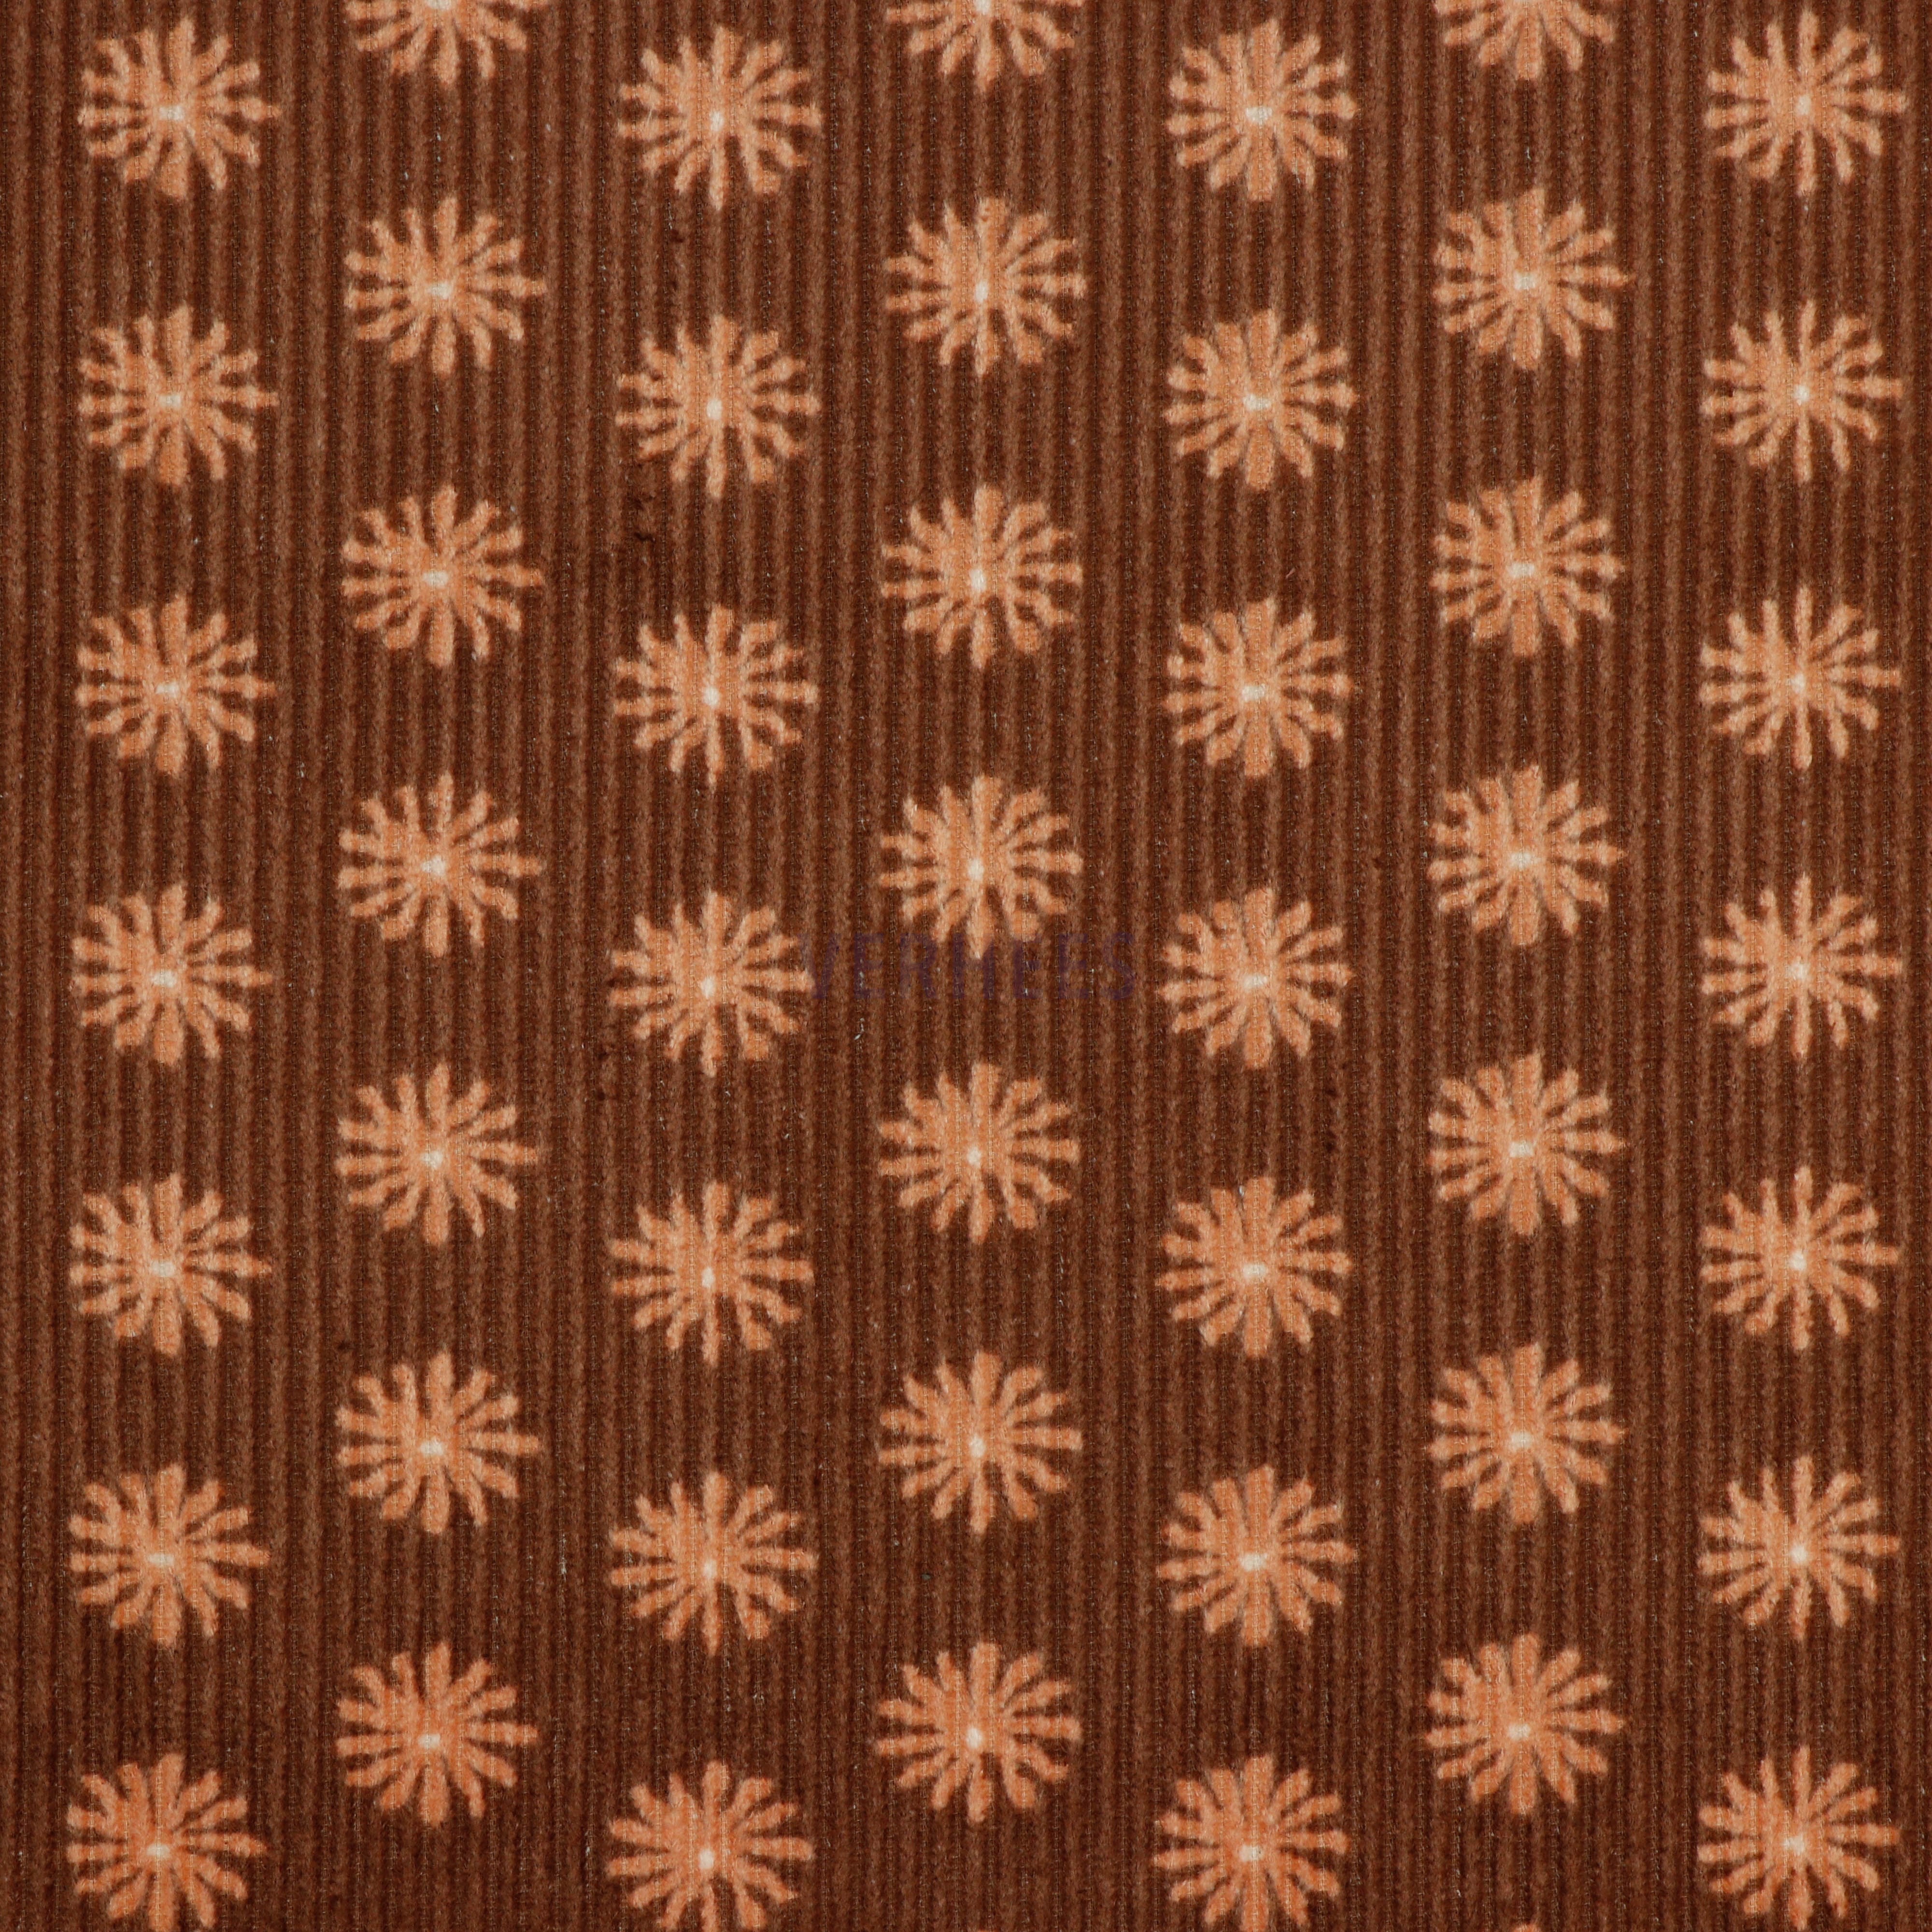 WASHED CORDUROY FLOWERS LIGHT BROWN (high resolution)